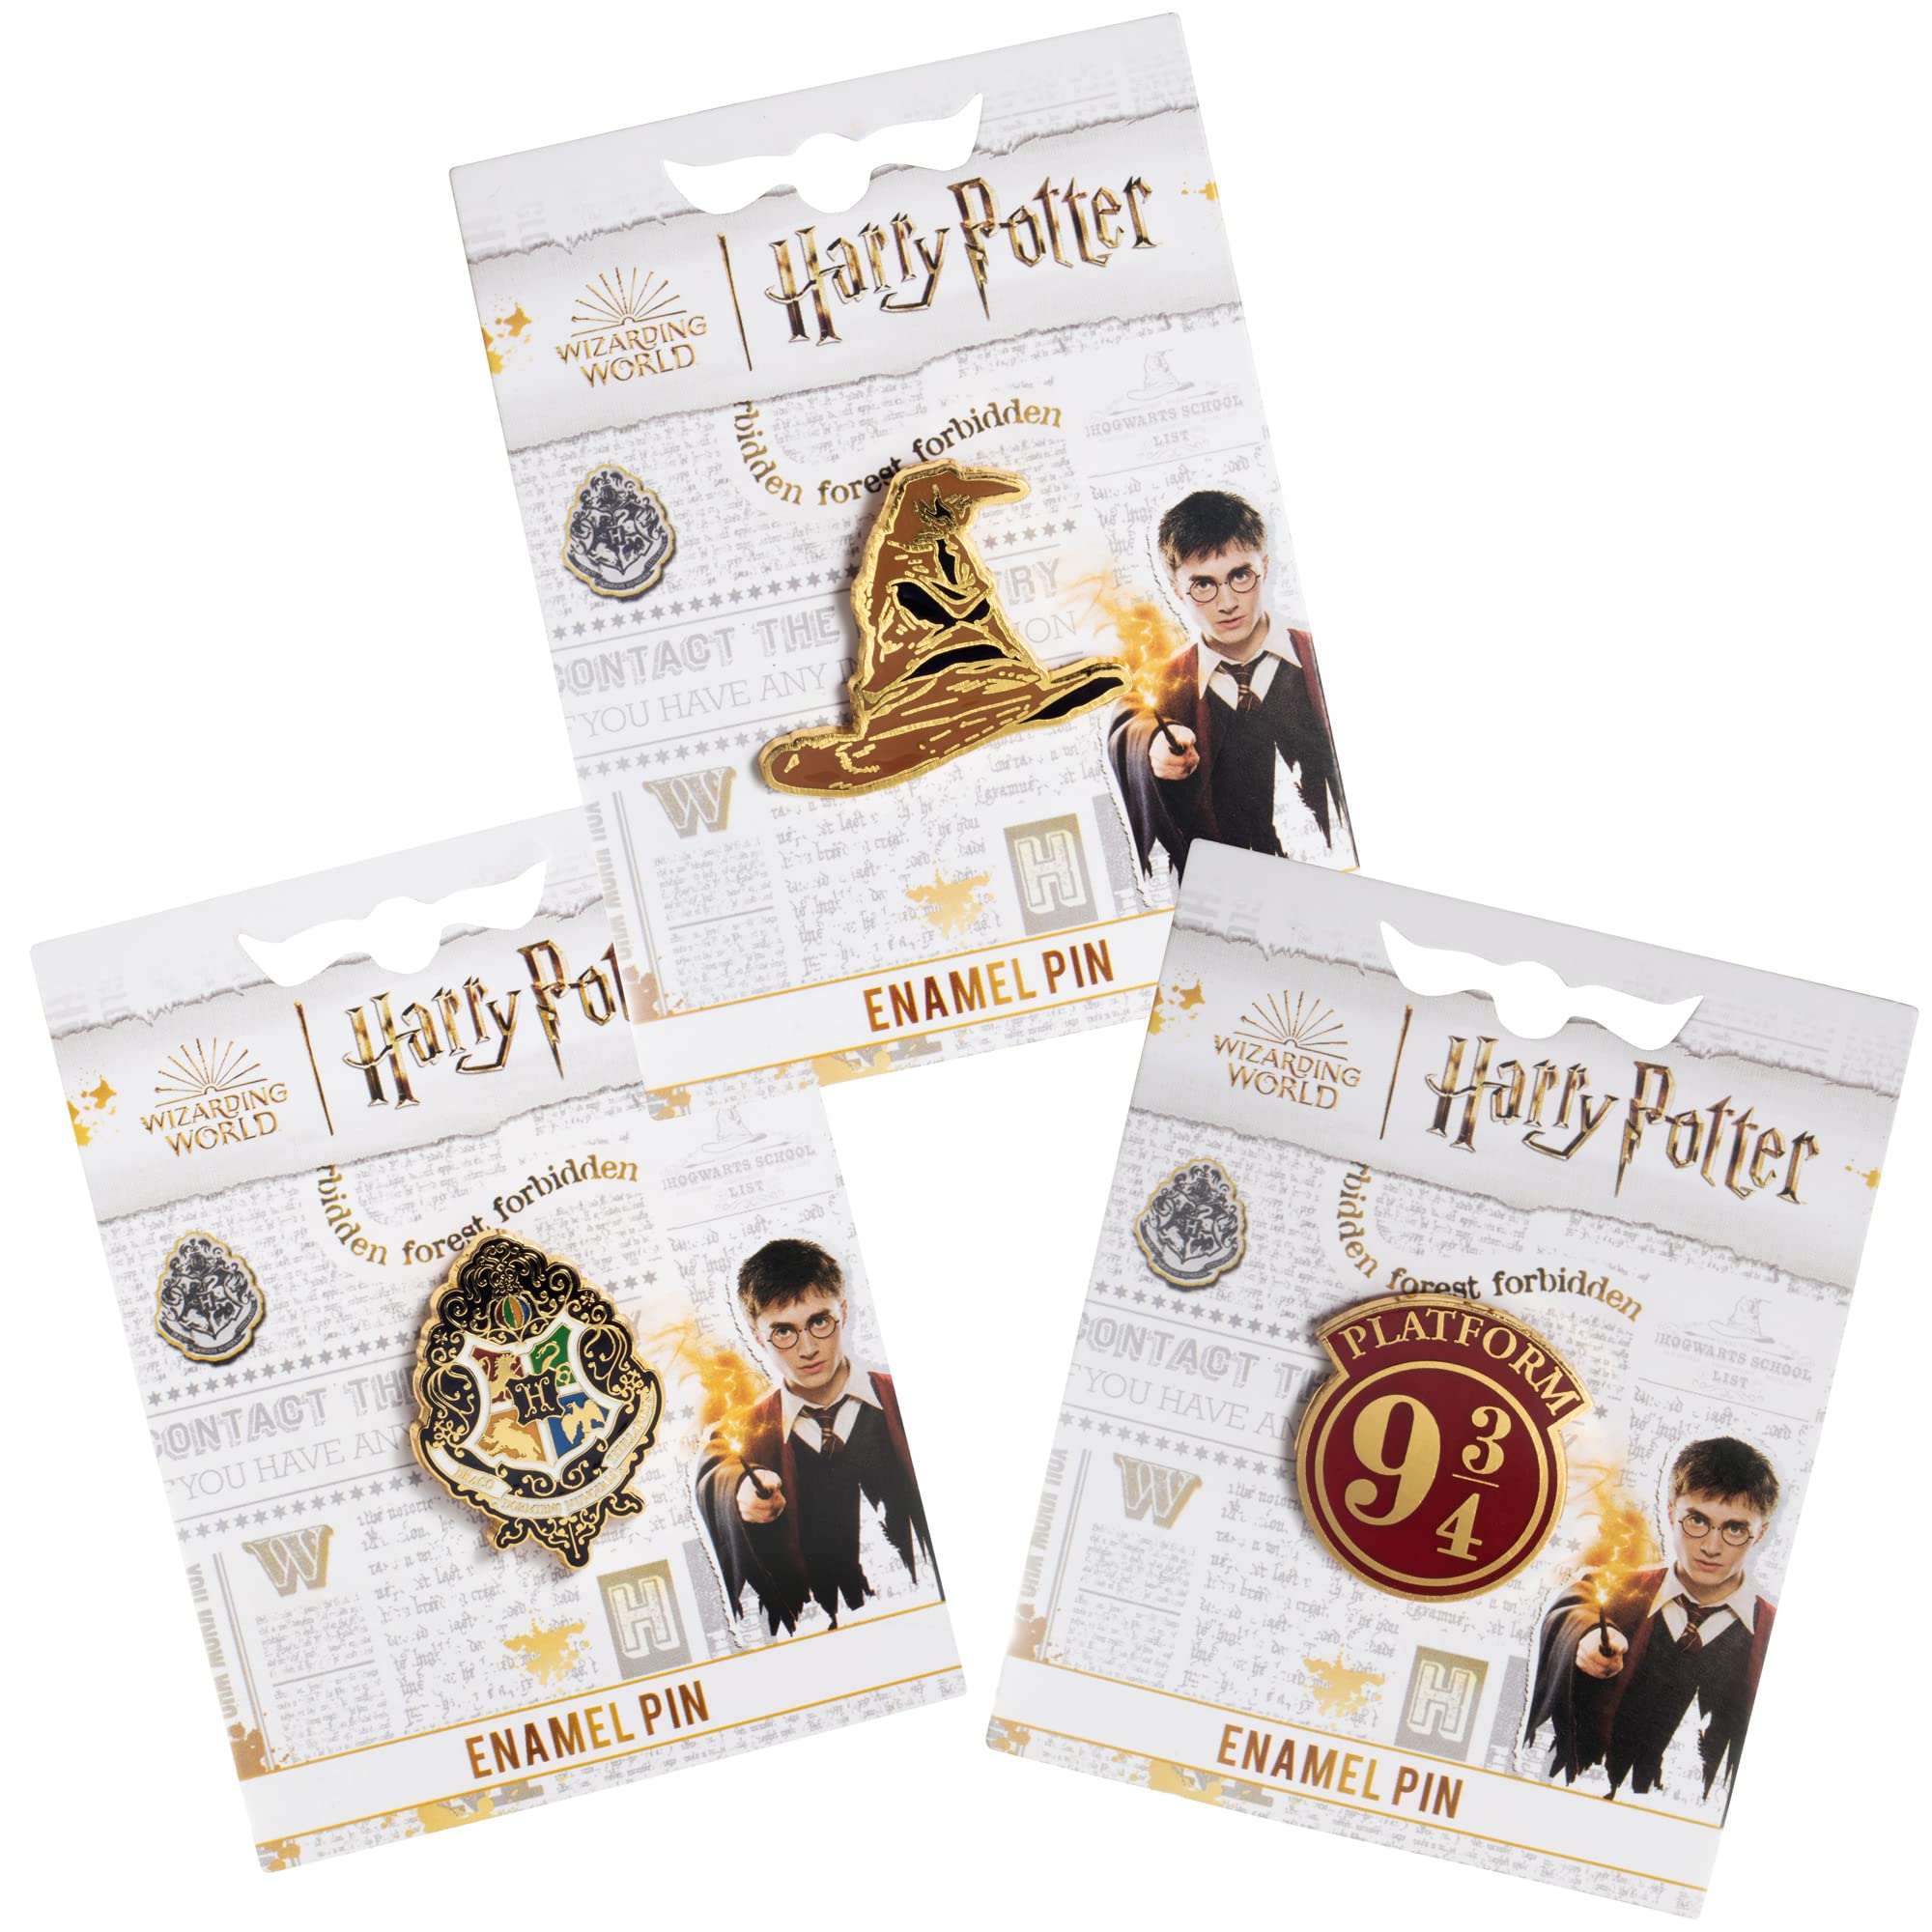 Harry Potter Enamel Pins, Set of 3 - Sorting Hat, Hogwarts Crest, Platform 9 3/4 - Collectible Metal Pin Button Accessory - Officially Licensed - Gift for Kids, Boys, Girls & Teens